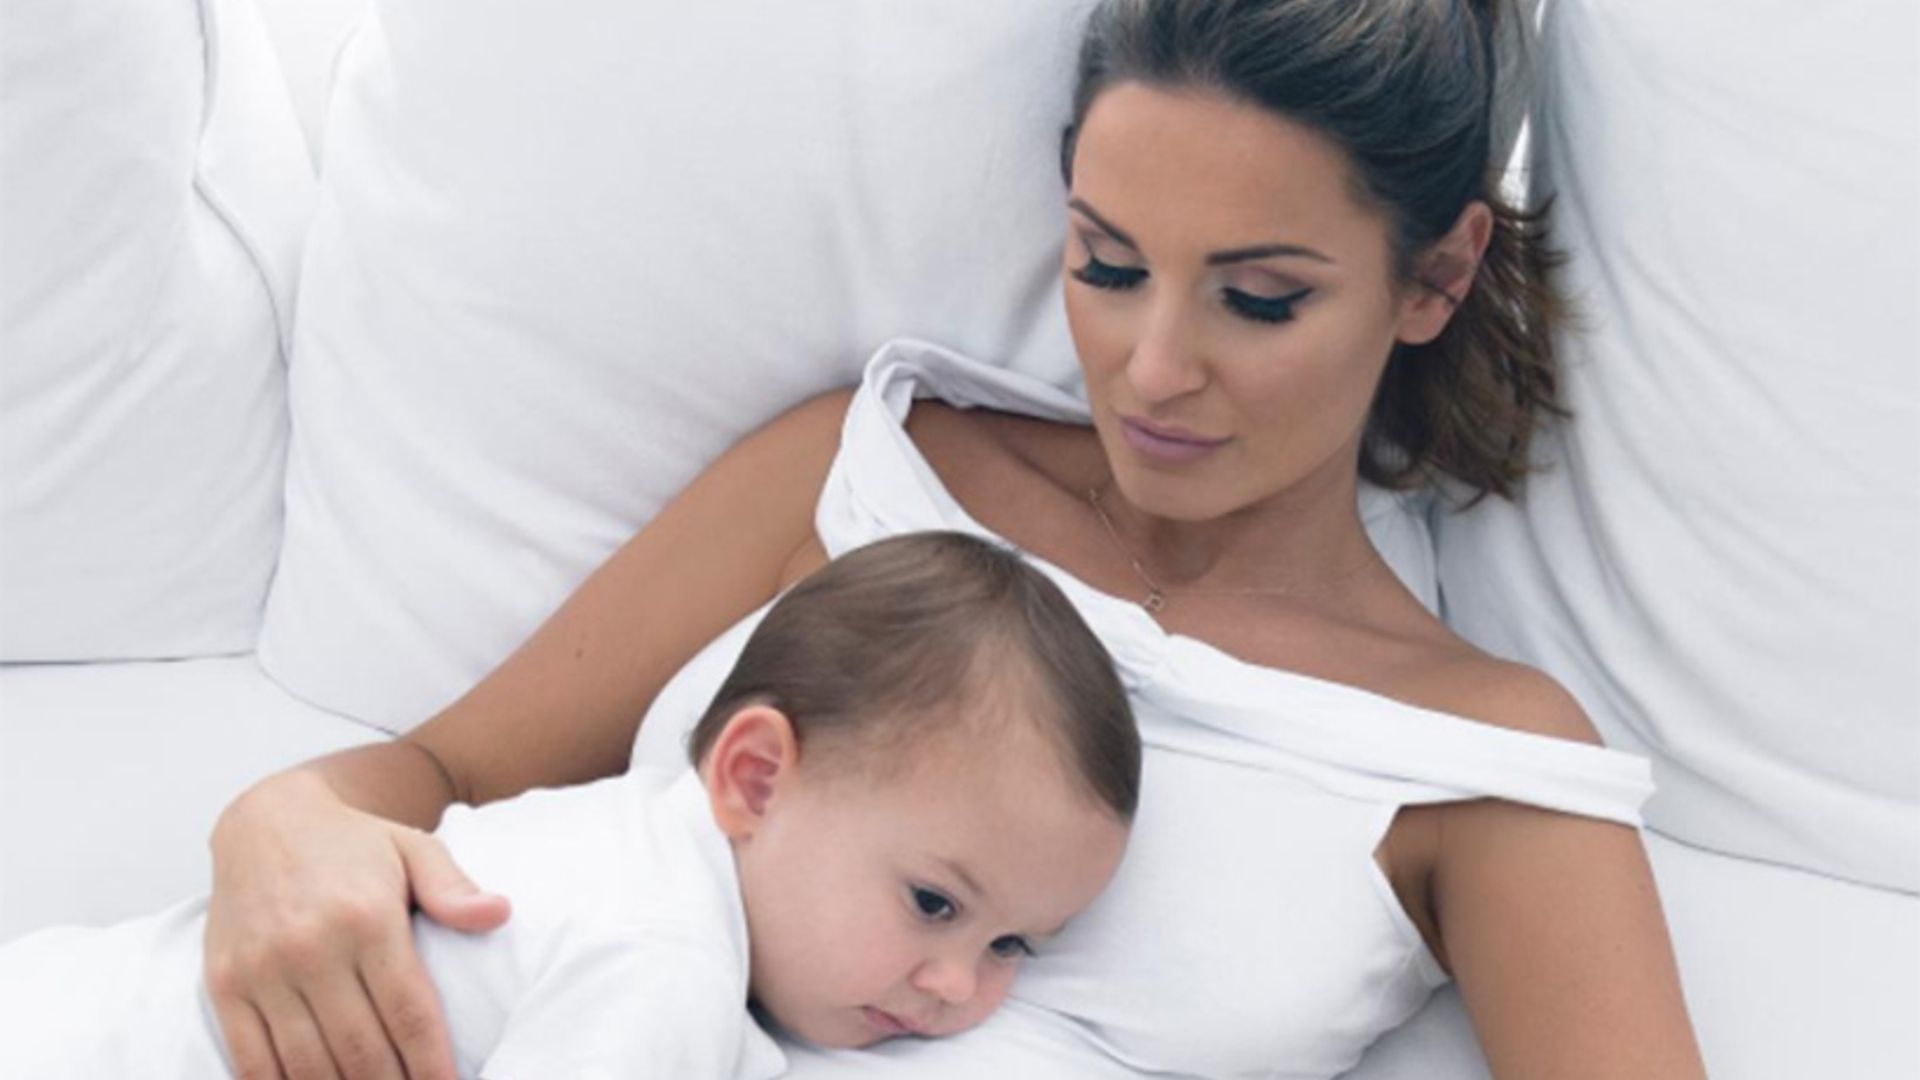 Sam Faiers posts beautiful first photo of newborn baby daughter